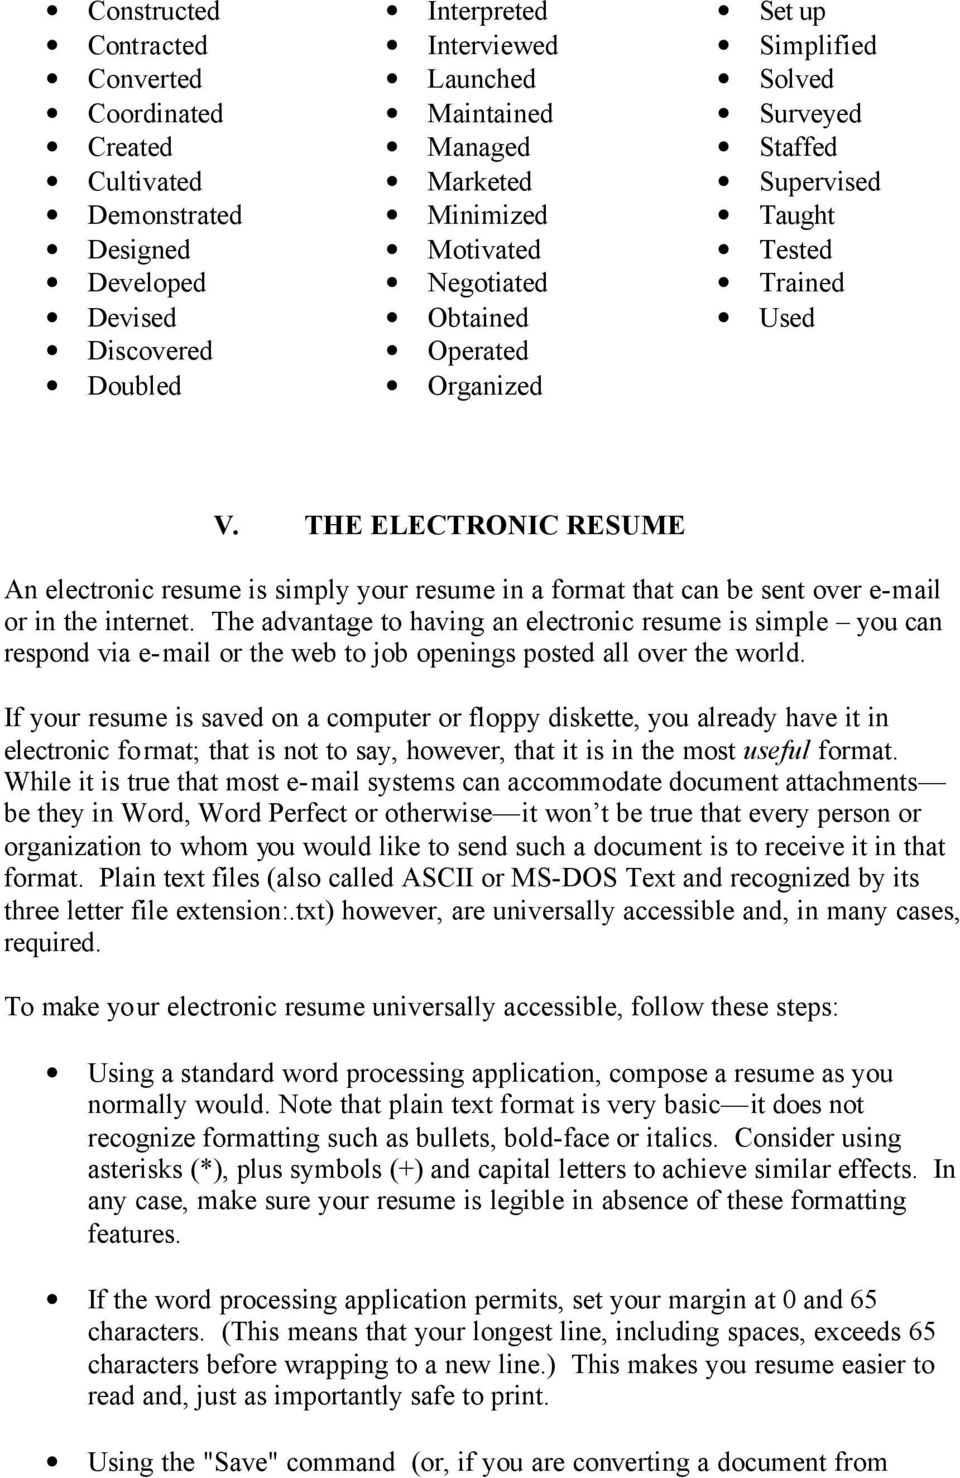 THE ELECTRONIC RESUME An electronic resume is simply your resume in a format that can be sent over e-mail or in the internet.